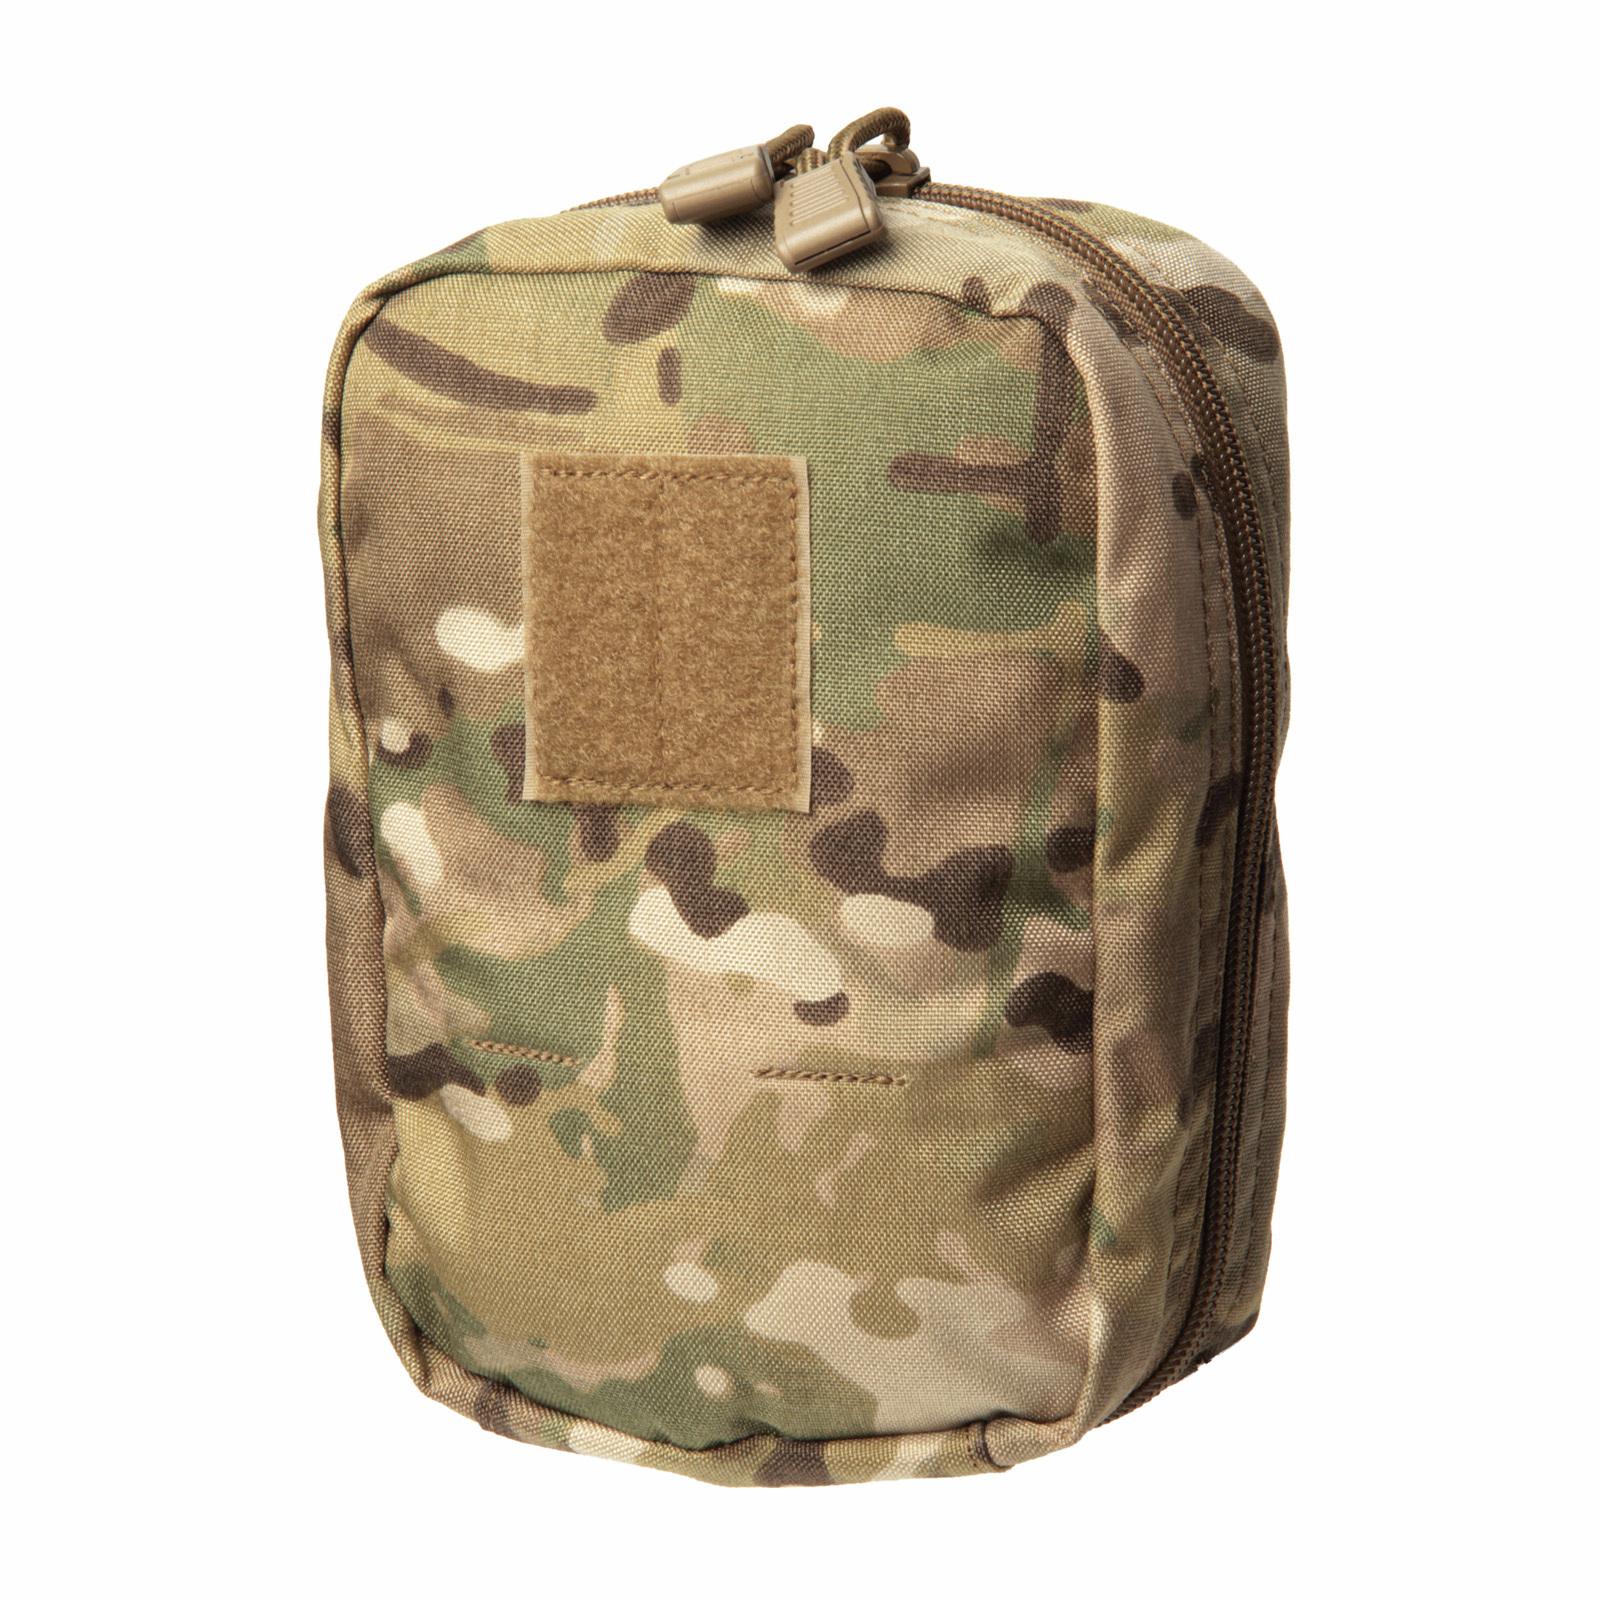 Buy S.T.R.I.K.E. Compact Medical Pouch - MOLLE And More